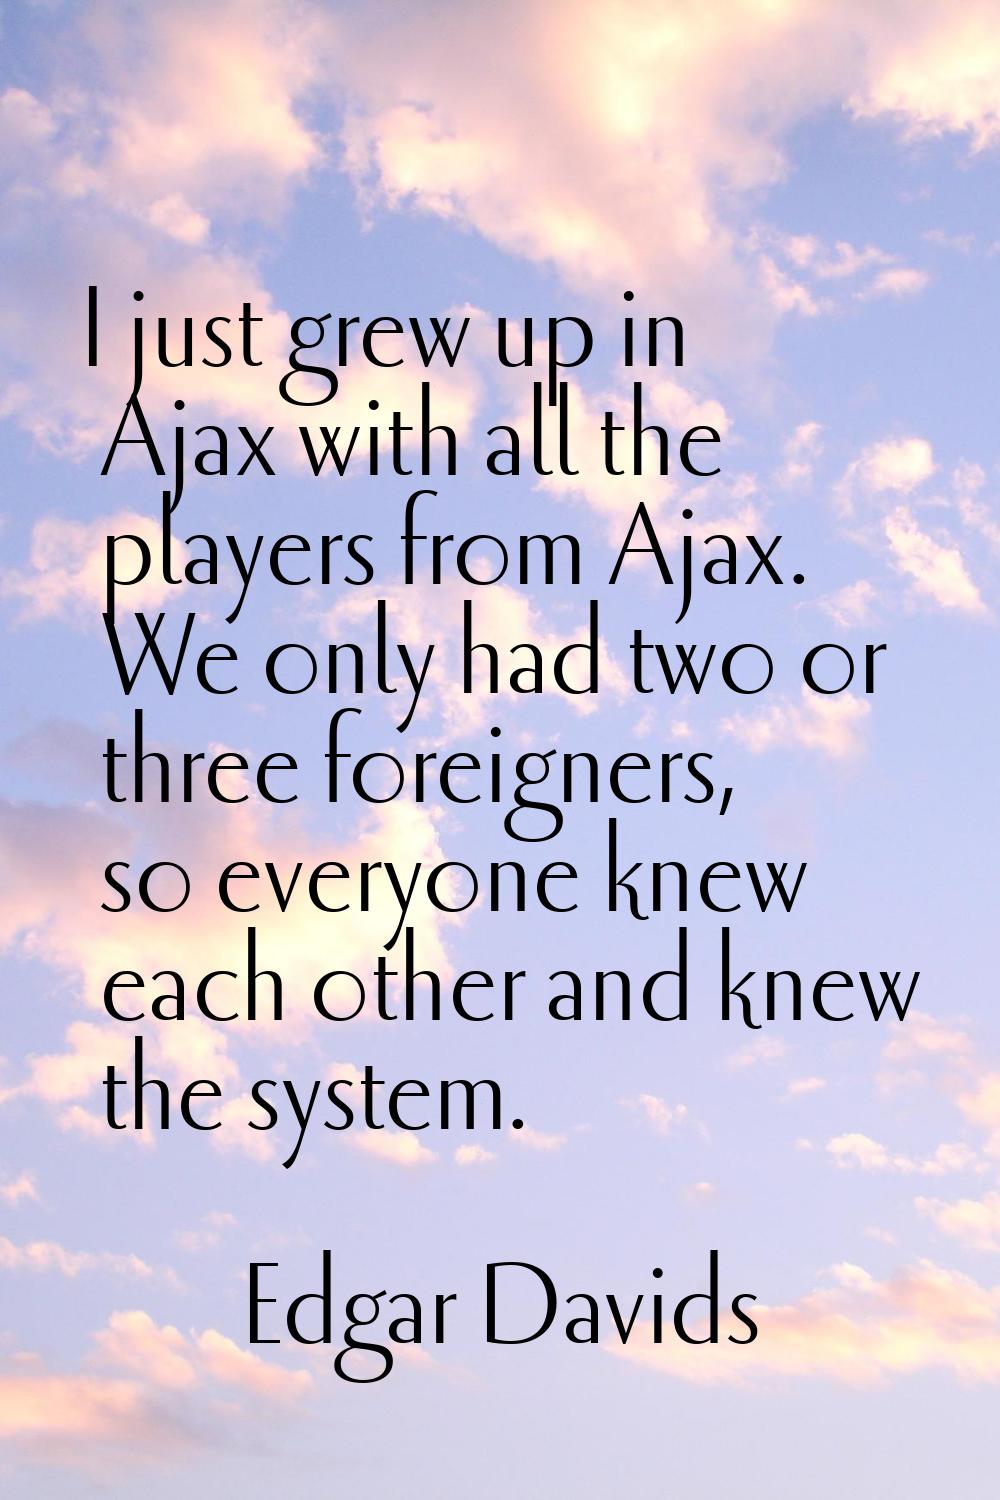 I just grew up in Ajax with all the players from Ajax. We only had two or three foreigners, so ever